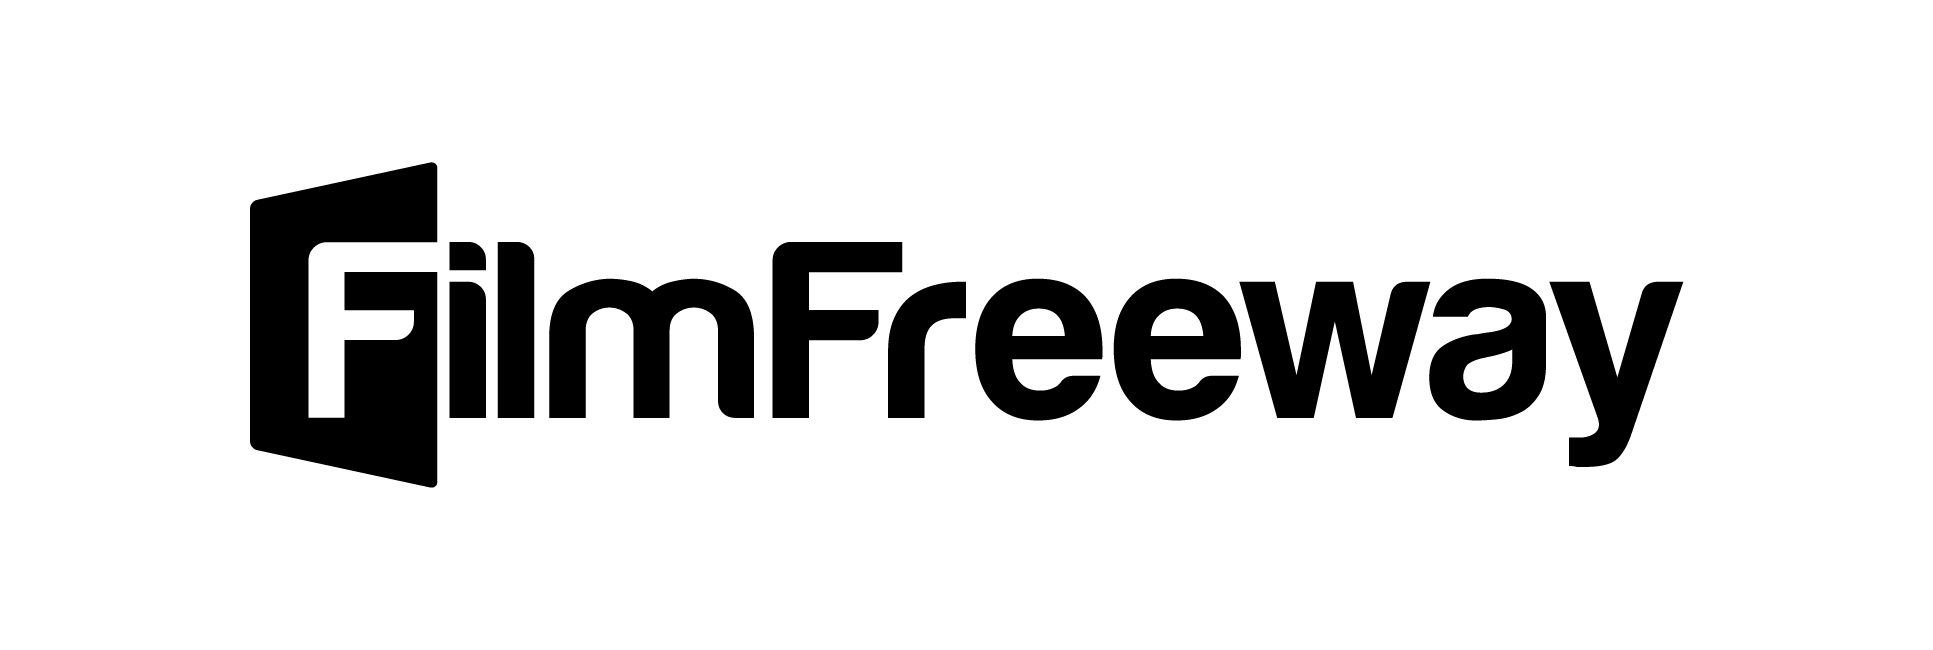 Freeway Logo - Submission Buttons and Logos